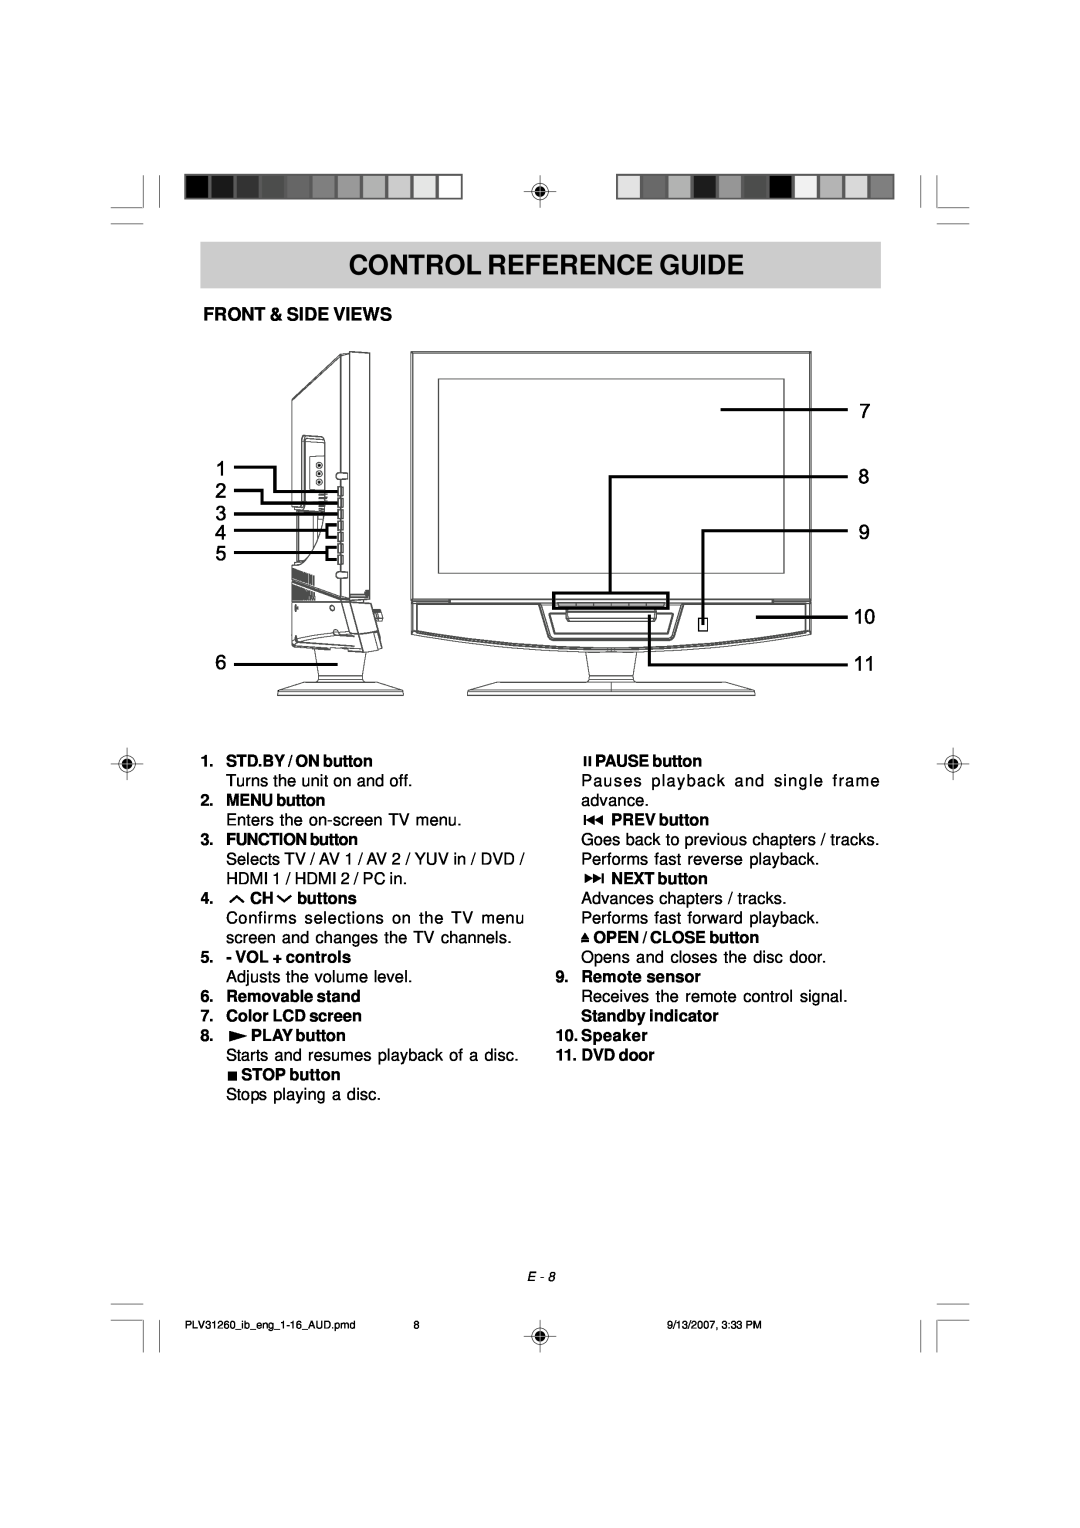 Audiovox FPE2607DV owner manual Front & Side Views, Control Reference Guide 